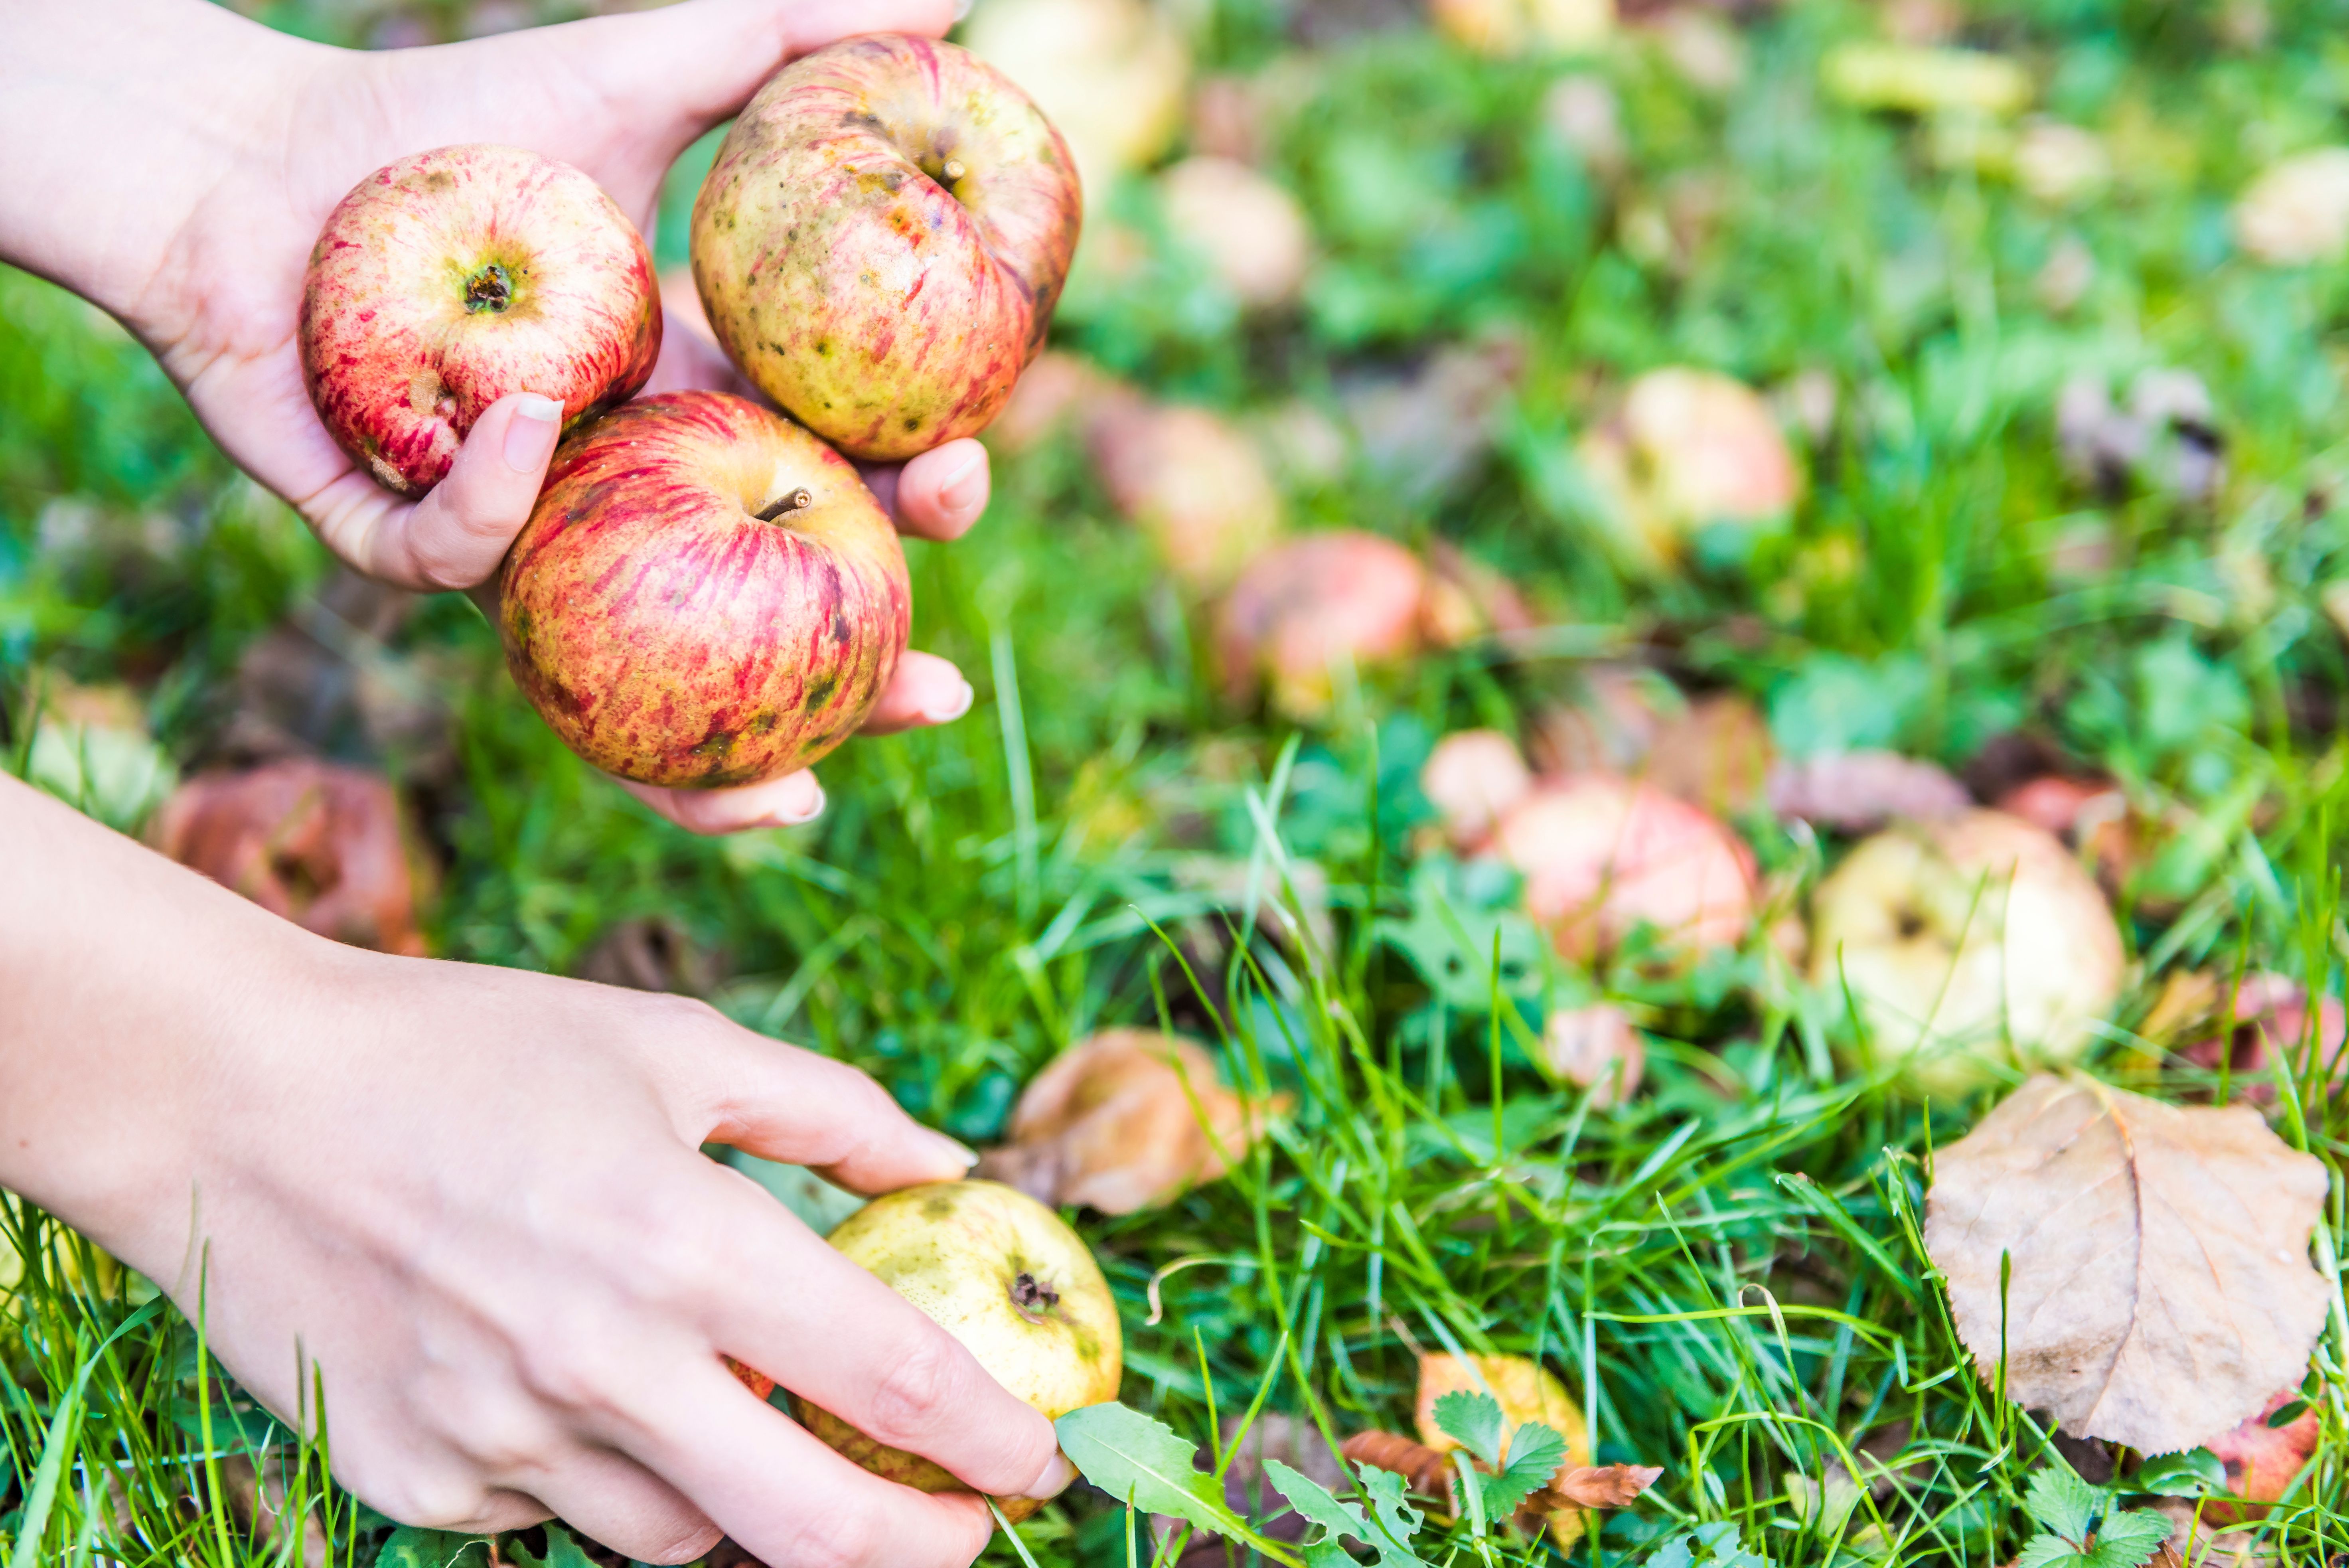 An image with hands picking up bruised apples from the ground.